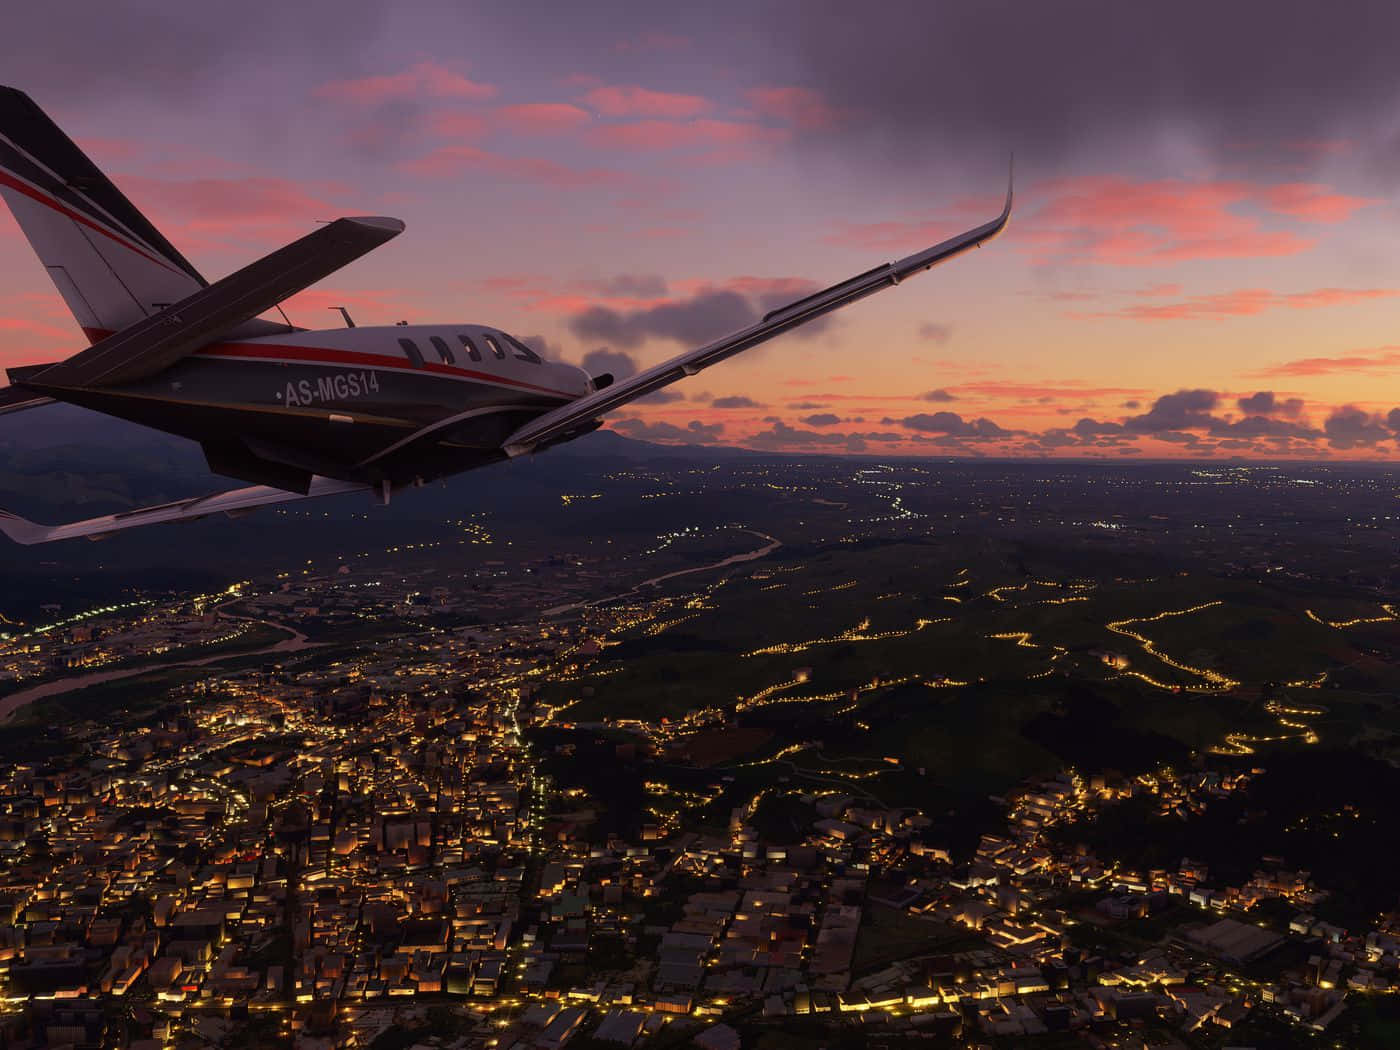 A Plane Flying Over A City At Dusk